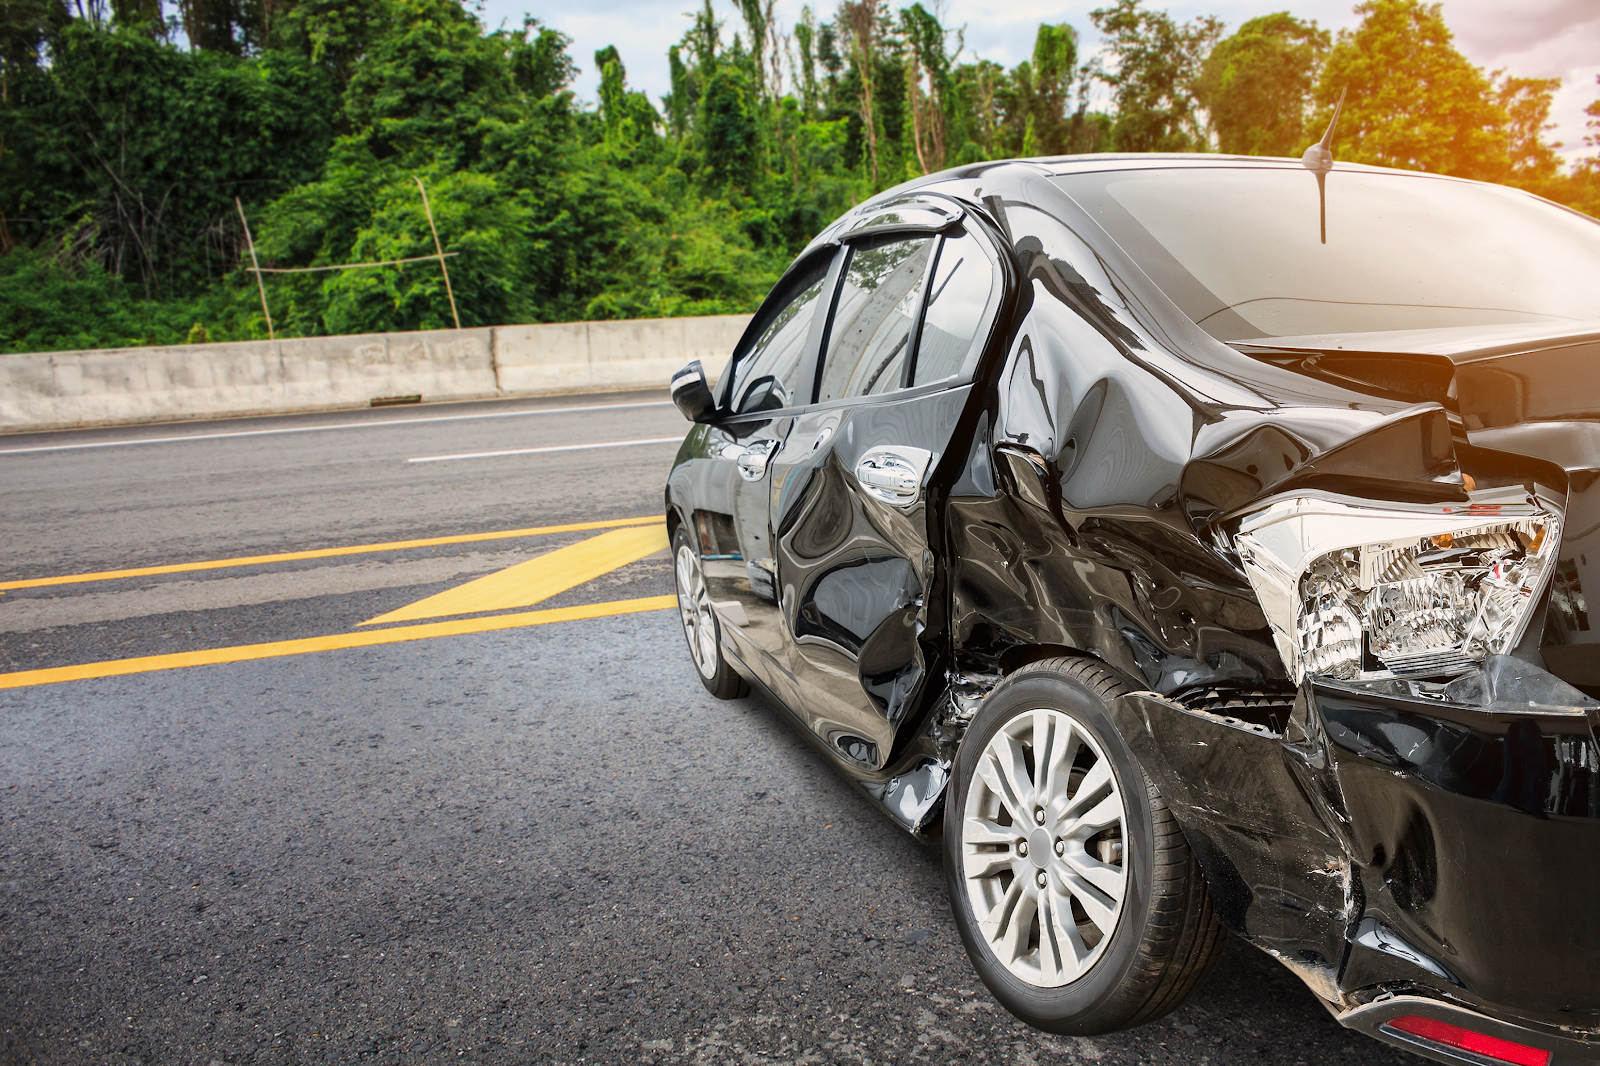 A car accident scene with a personal injury lawyer assessing the situation